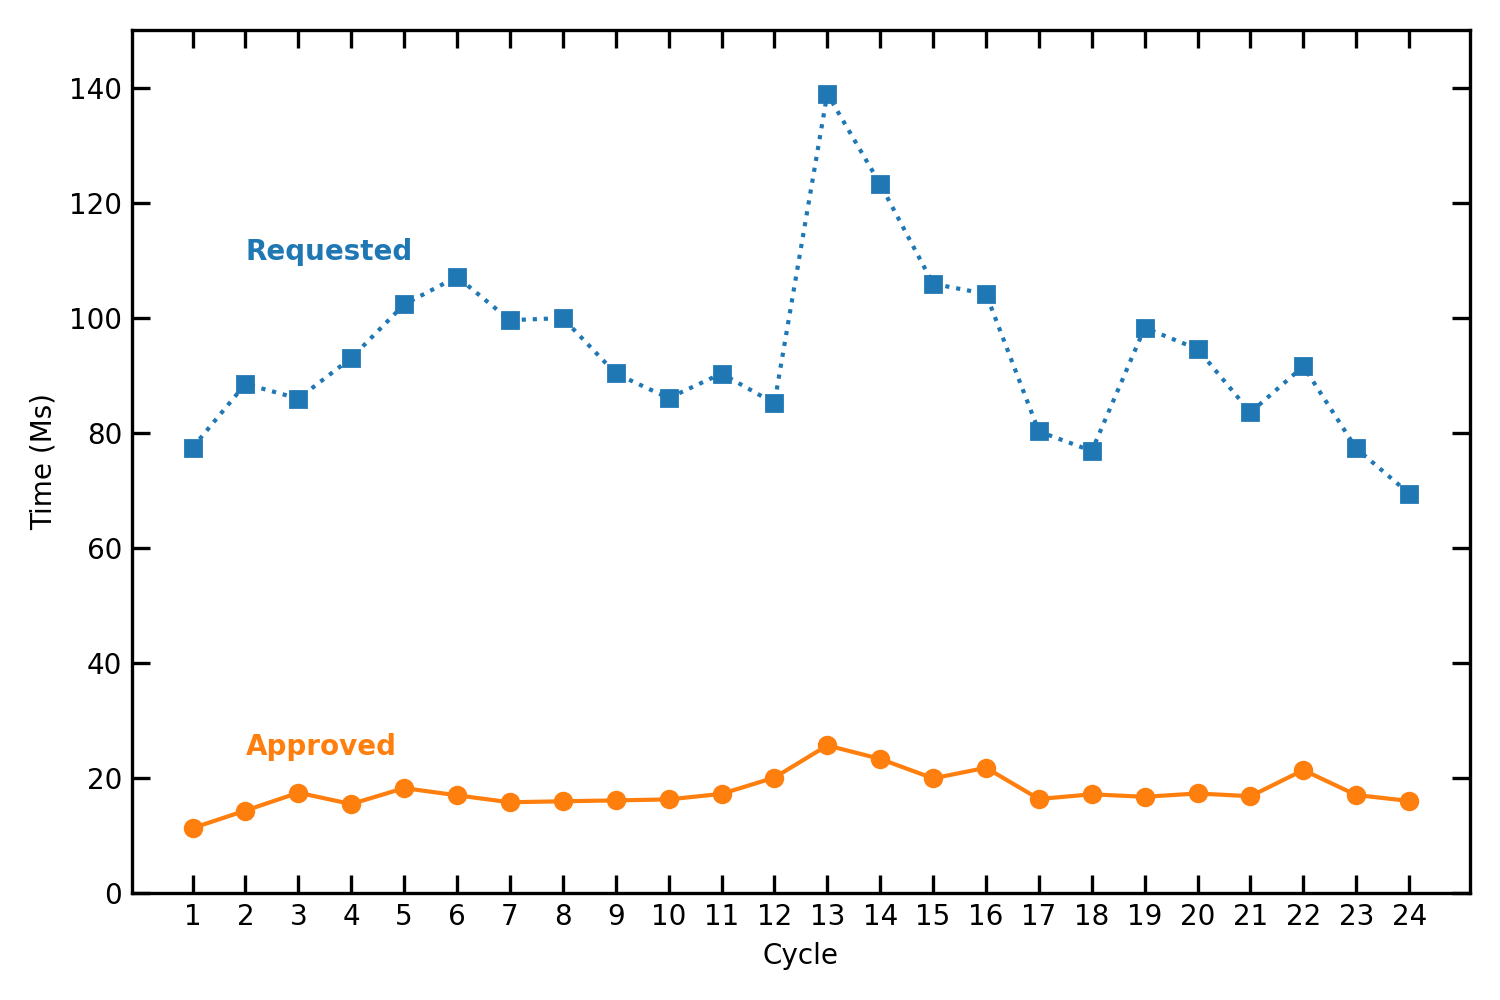 A line plot showing two data trends. The X-Axis shows Chandra Proposal Cycle, from 1 to 24. TheY-Axis is labeled Time, in units of Megaseconds, and stretches from 0 to just over 140. There are two colored data sets; these are labeled “Requested” in blue and “Approved” in orange. Aside from a spike to 140 Ms in Cycles 13 and 14, the requested line stays roughly between 80 and 100 Ms over the entire span. The approved line is fairly consistent over the entire Figure, other than a brief rise in the first few cycles and a slight bump in Cycles 13 and 14, hovering around 20 Ms throughout.